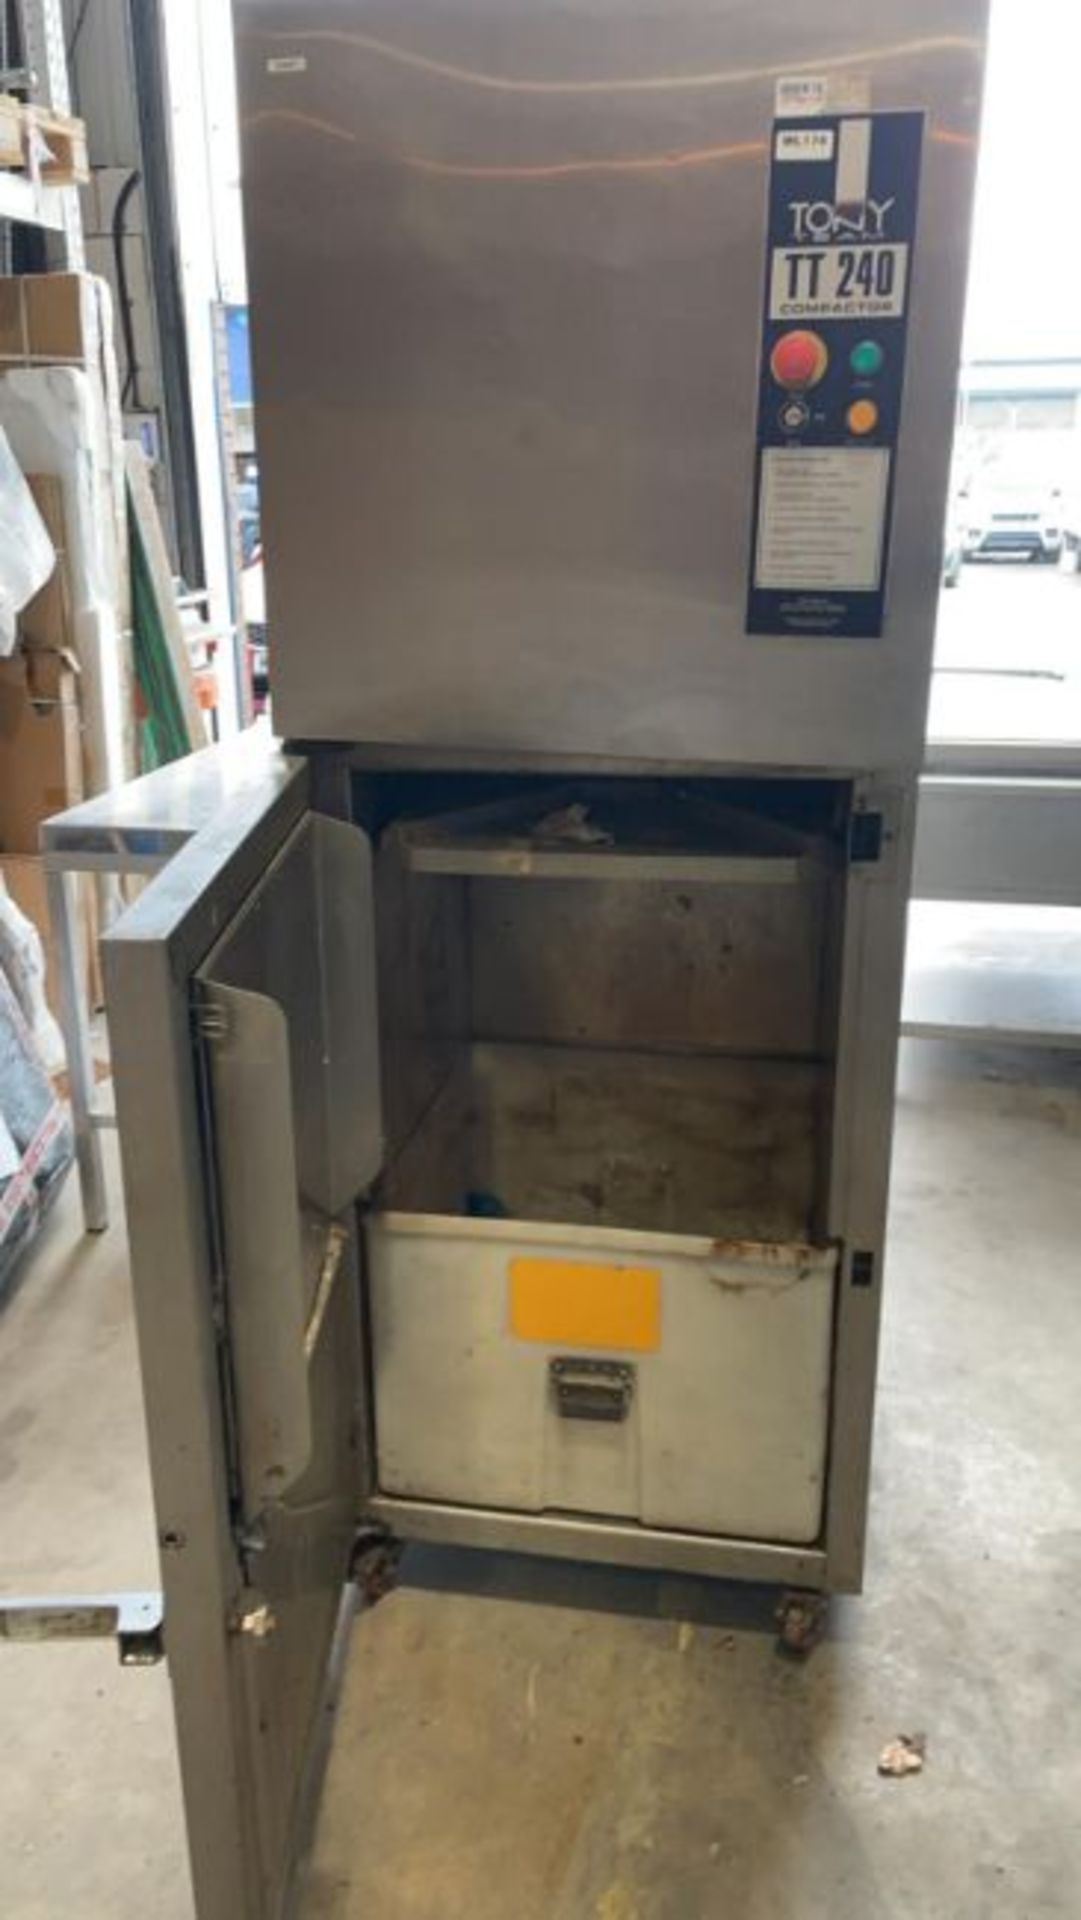 1 x Tony Team TT240 Bag Compactor With 240l Capacity - Stainless Steel Finish - CL011 - Location: - Image 10 of 10